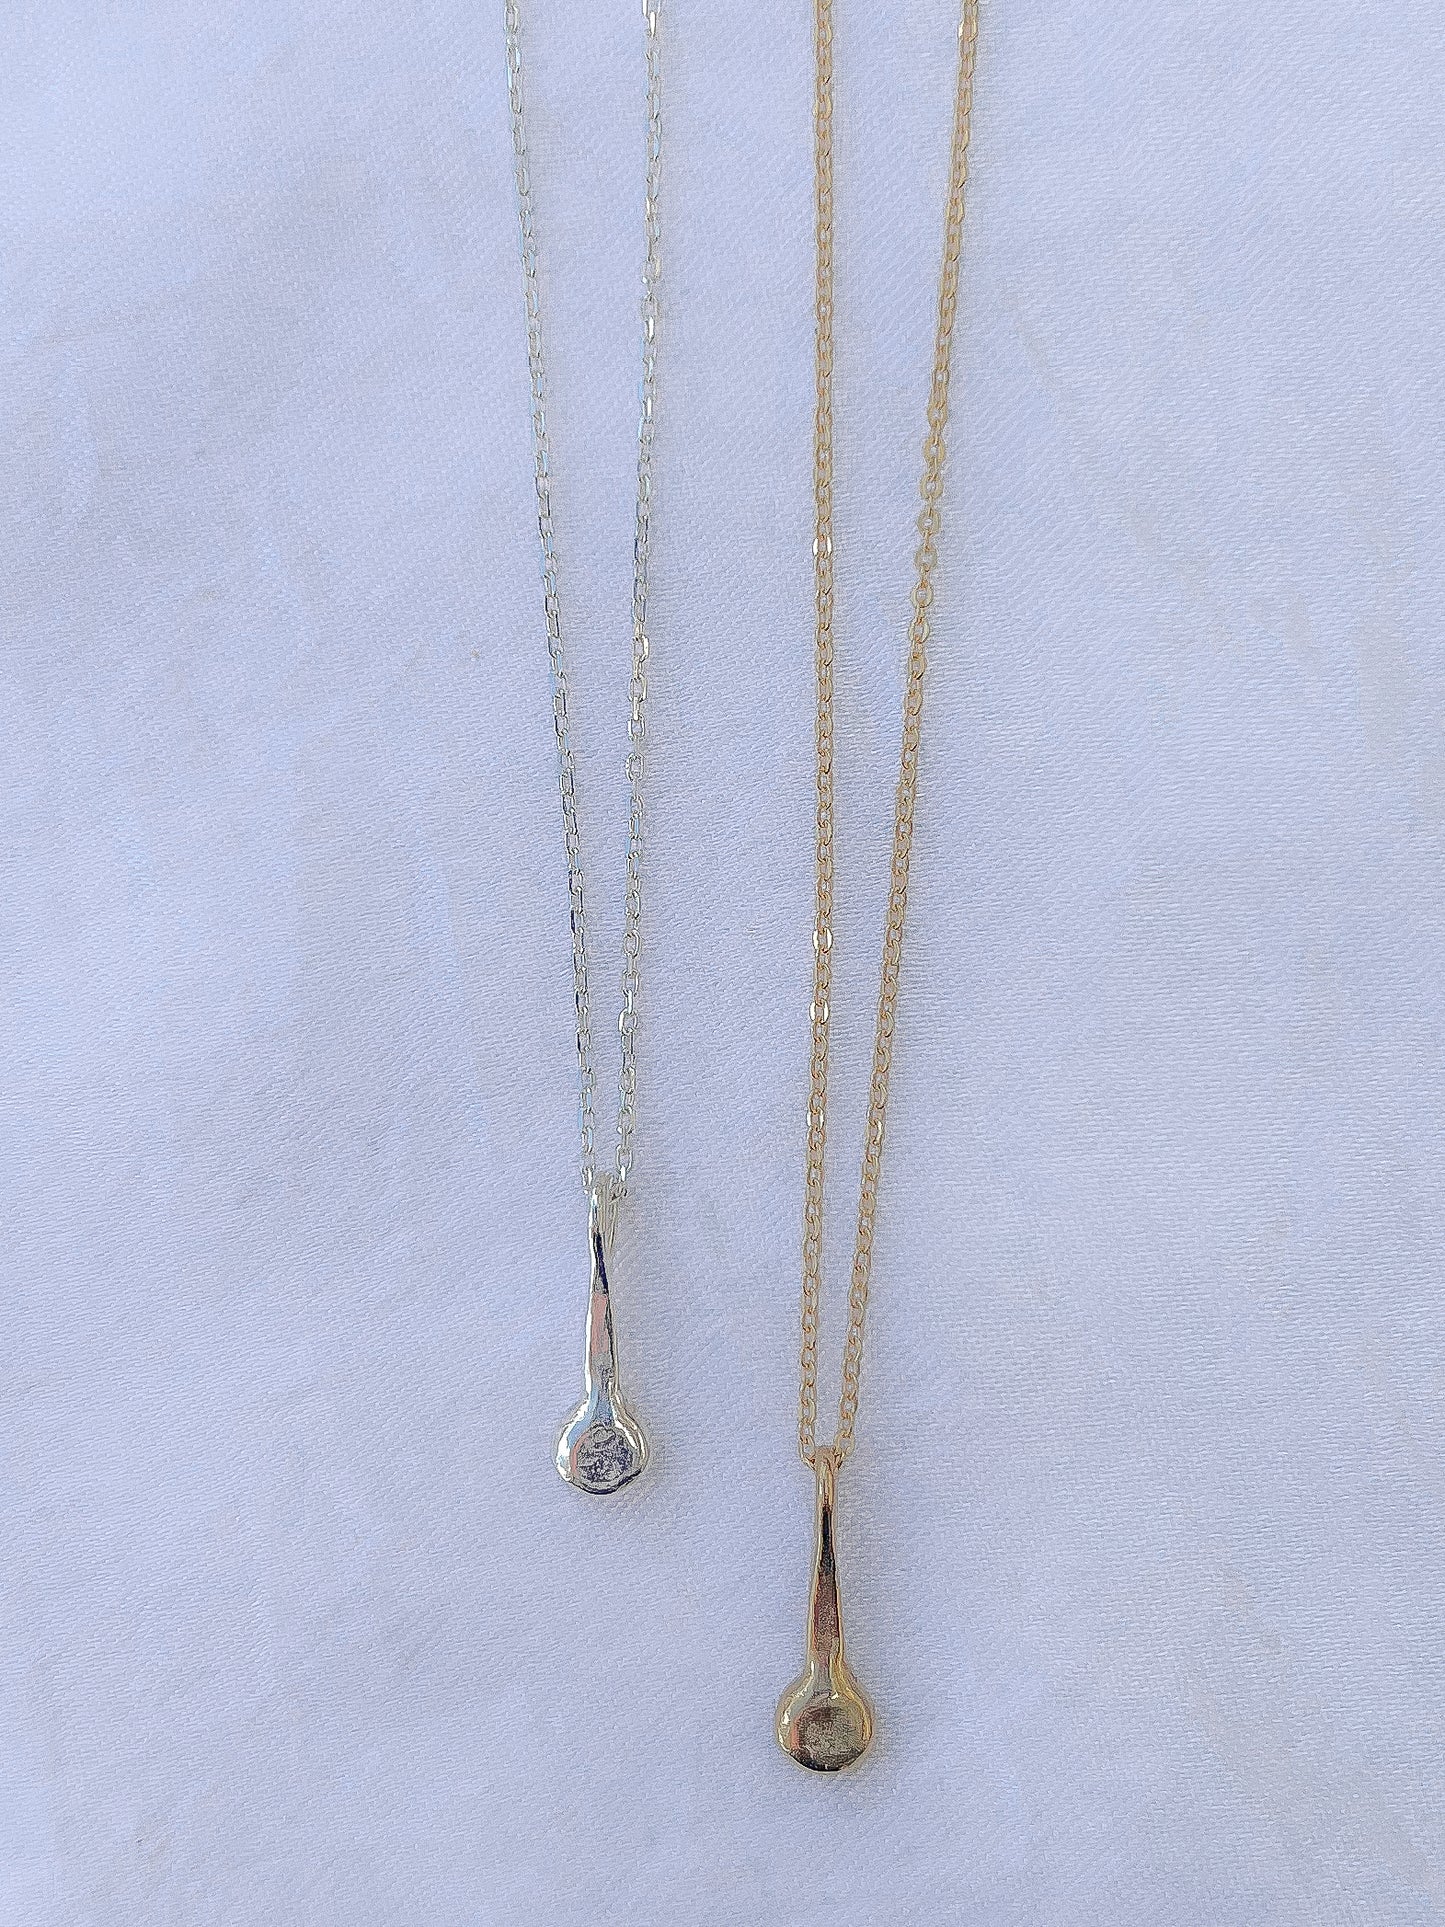 Handmade simple talisman necklace to adorn your neck. Sustainably made in northern California by Amanda Hunt.